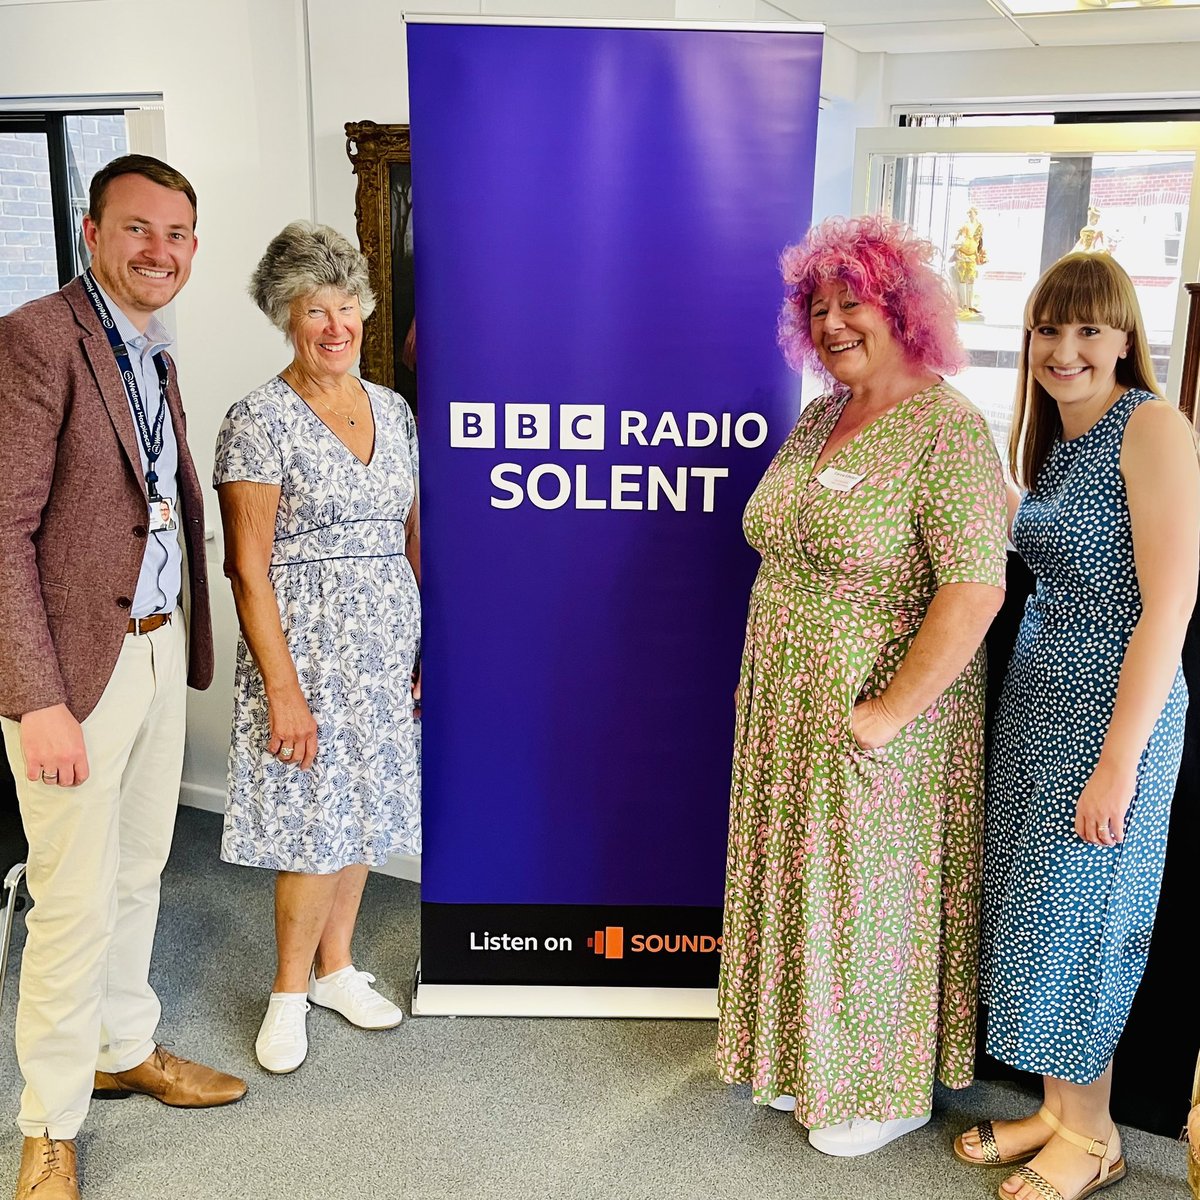 Wonderful to join @BBCRadioSolent Dorset this AM with one of our @Weldmar patients for their 10th anniversary show. Great to catch up with so many people from across the county and sampled delicious cakes from these two bake off stars! #Dorset #Hospice #Hospicecare